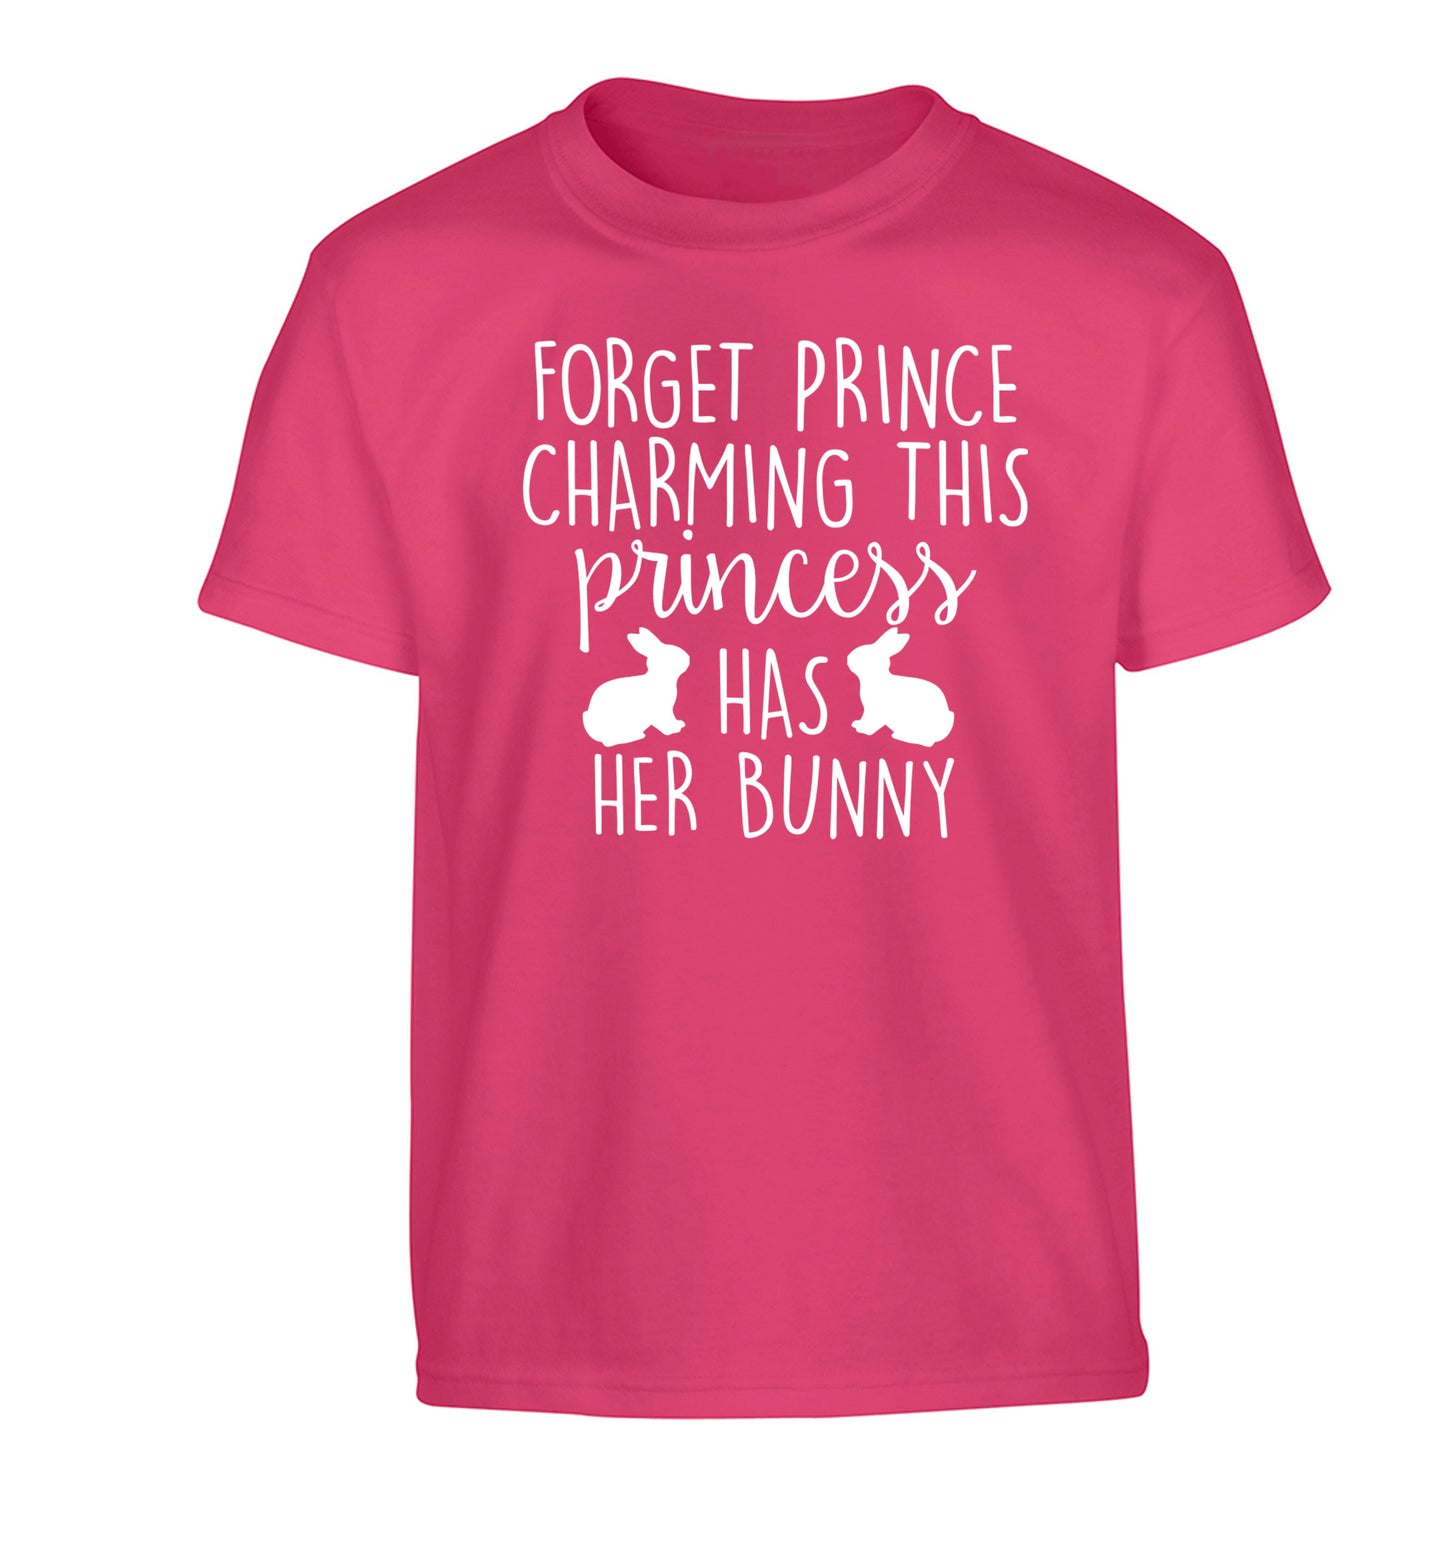 Forget prince charming this princess has her bunny Children's pink Tshirt 12-14 Years